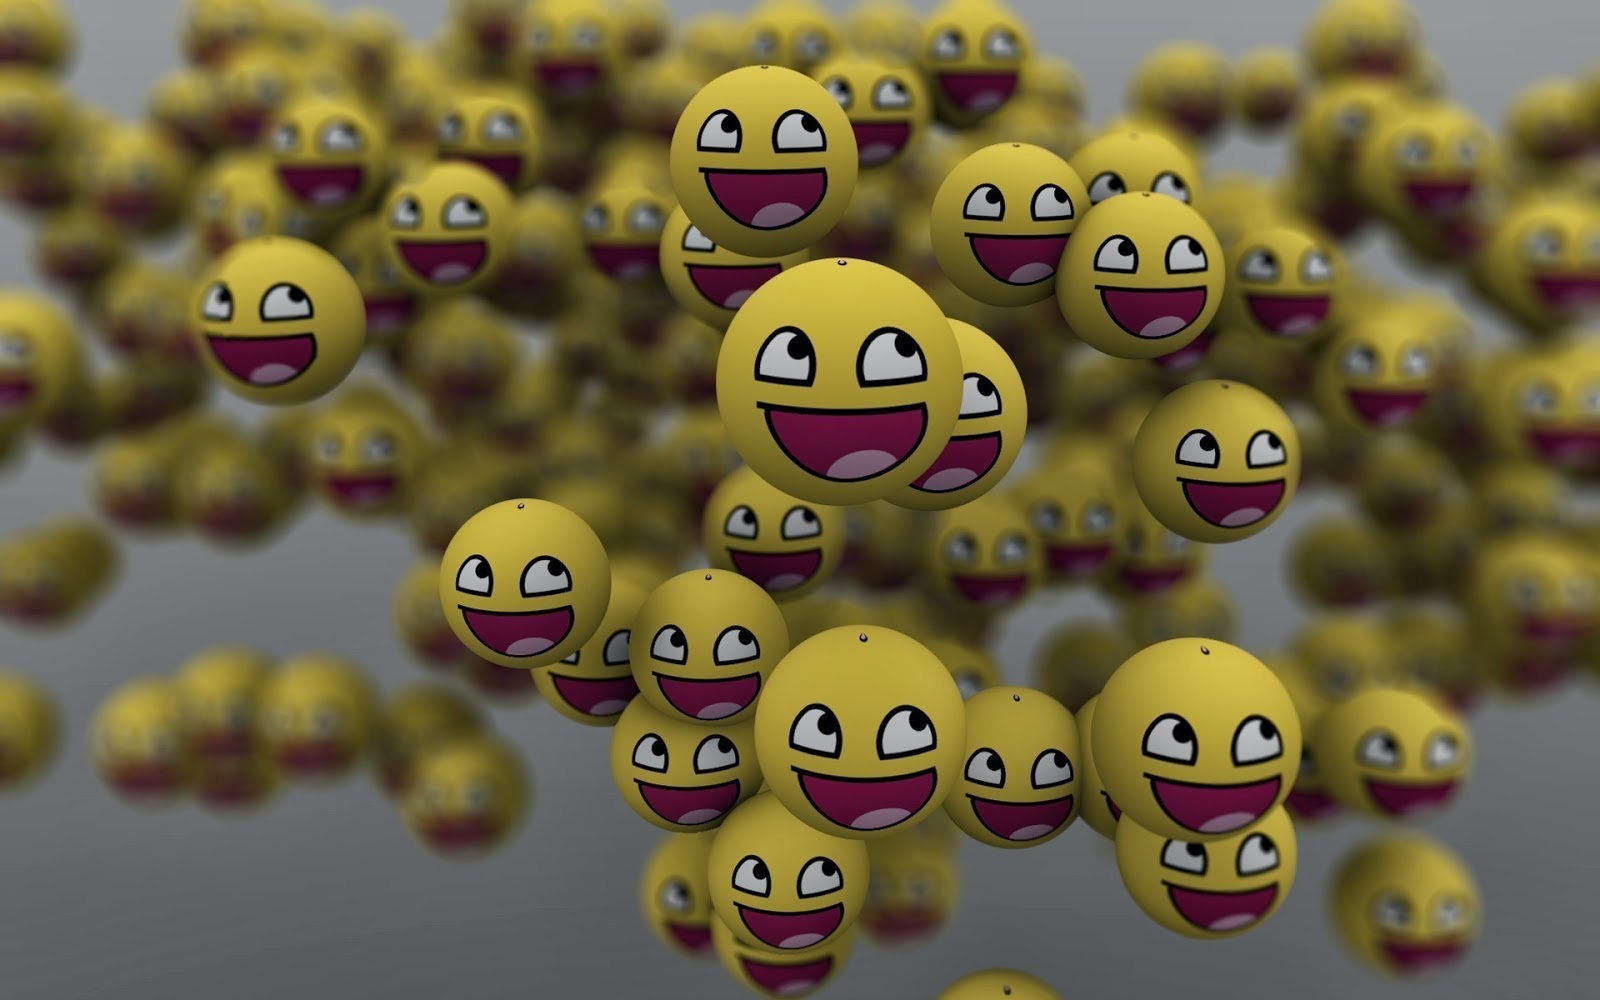 Smiley HD Wallpaper Background